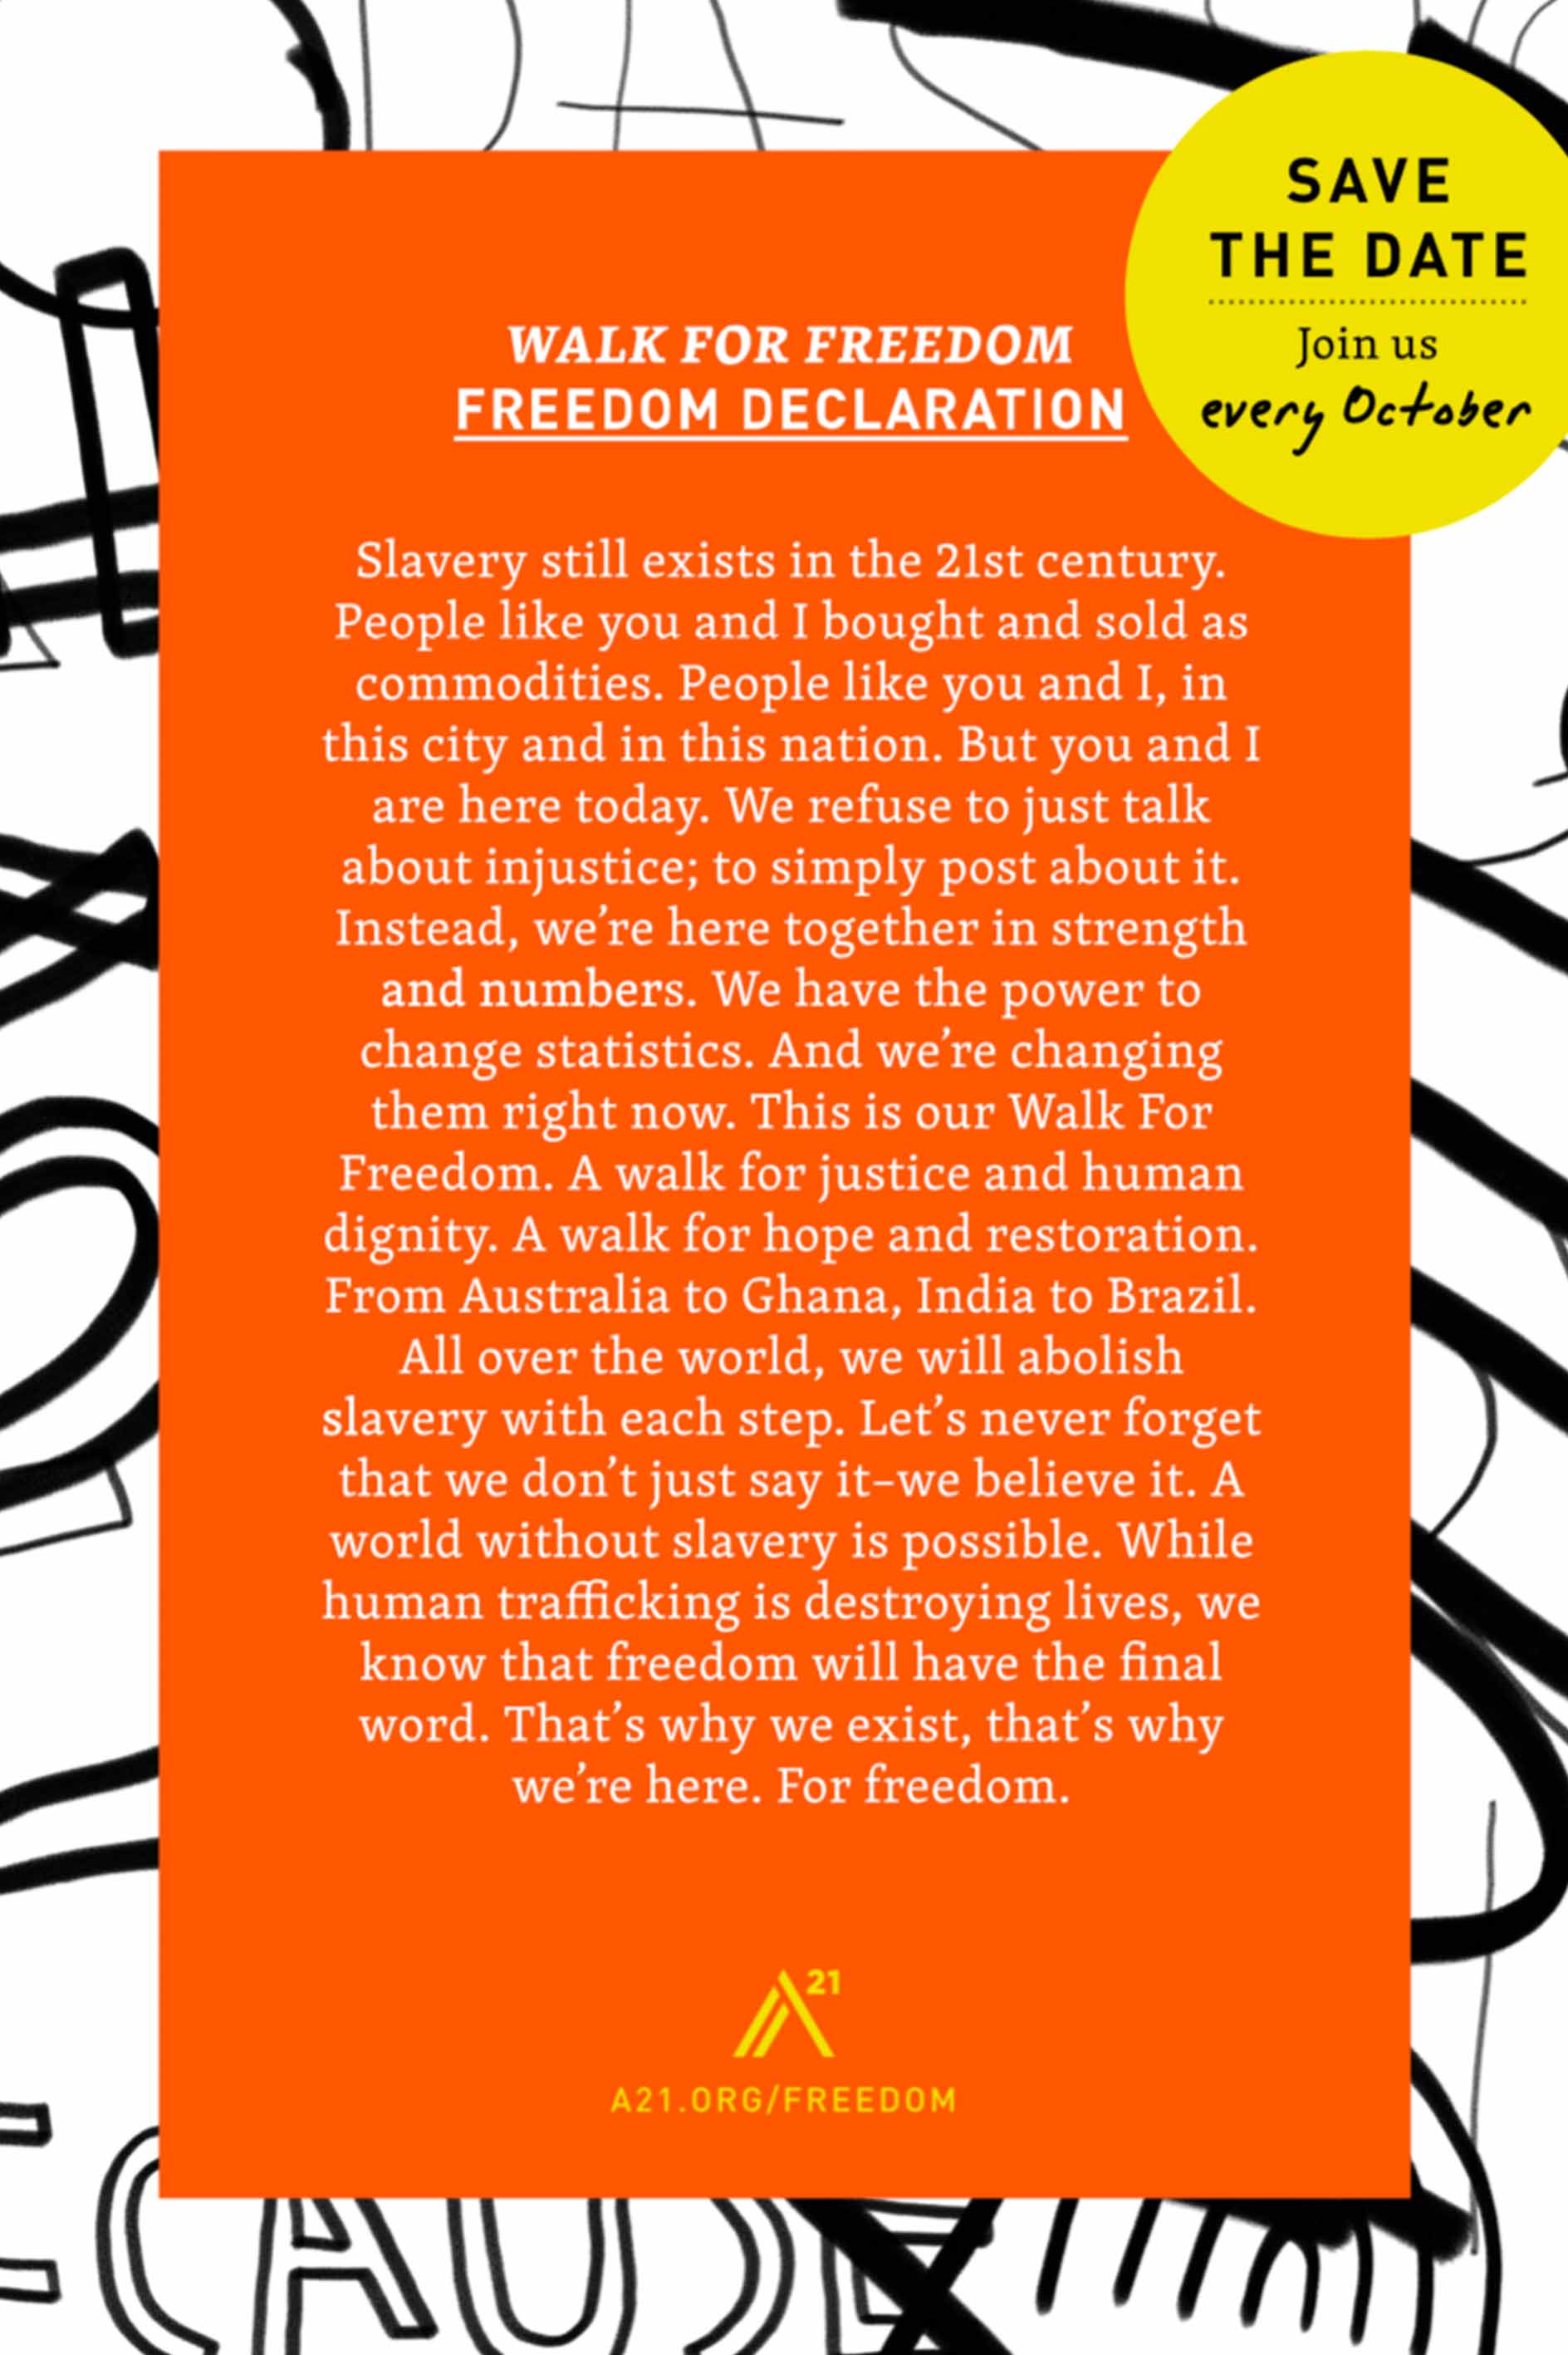 Poster 8: Walk For Freedom: Freedom Declaration: Wave the date. Join us every October. Slavery still exists in the 21st century. People like you and I, bought and sold as commodities. People like you and I, in this city and in this nation. But you and I are here today. We refuse to just talk about injustice; to simply post about it. Instead, we're here together in strength and numbers. We have the power to change statistics. And we're changing them right now. This is our Walk For Freedom. A walk for justice and human dignity. A walk for hope and restoration. From Australia to Ghana, India to Brazil. All over the world, we will abolish slavery with each step. Let's never forget that we don't just say it– we believe it. A world without slavery is possible. While human trafficking is destroying lives, we know that freedom will have the final word. That's why we exist, that's why we're here. For freedom.